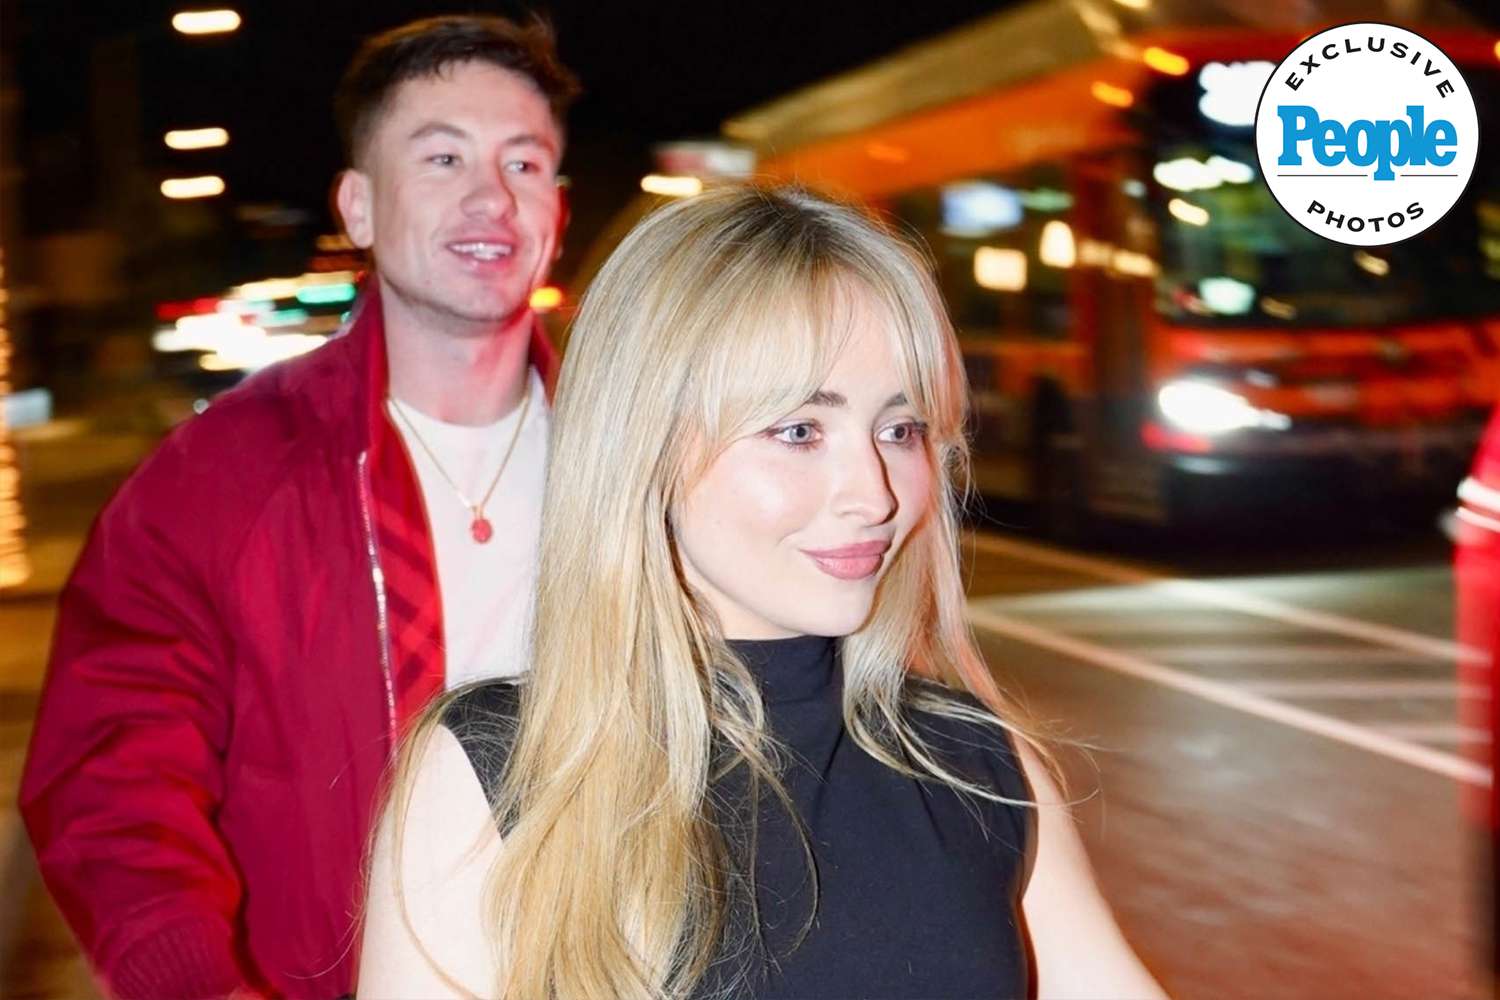 Sabrina Carpenter and Barry Keoghan were spotted together for the first time, sharing affectionate moments and dining out. Keoghan recently split from Alyson Kierans, with 